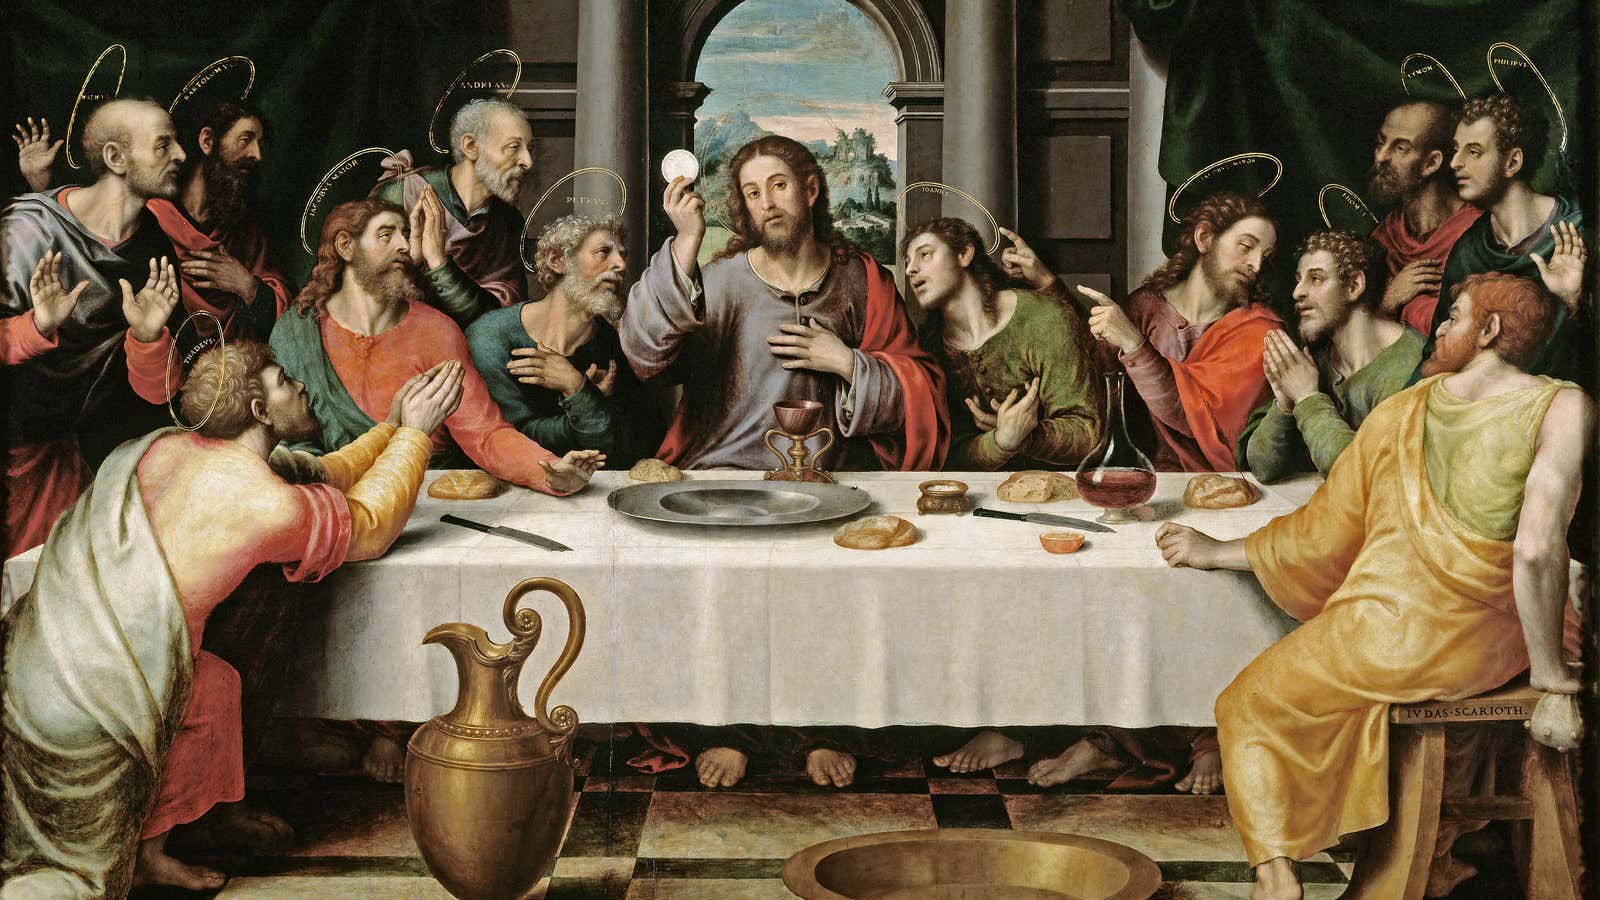 Gluten was probably not a concern during The Last Supper.